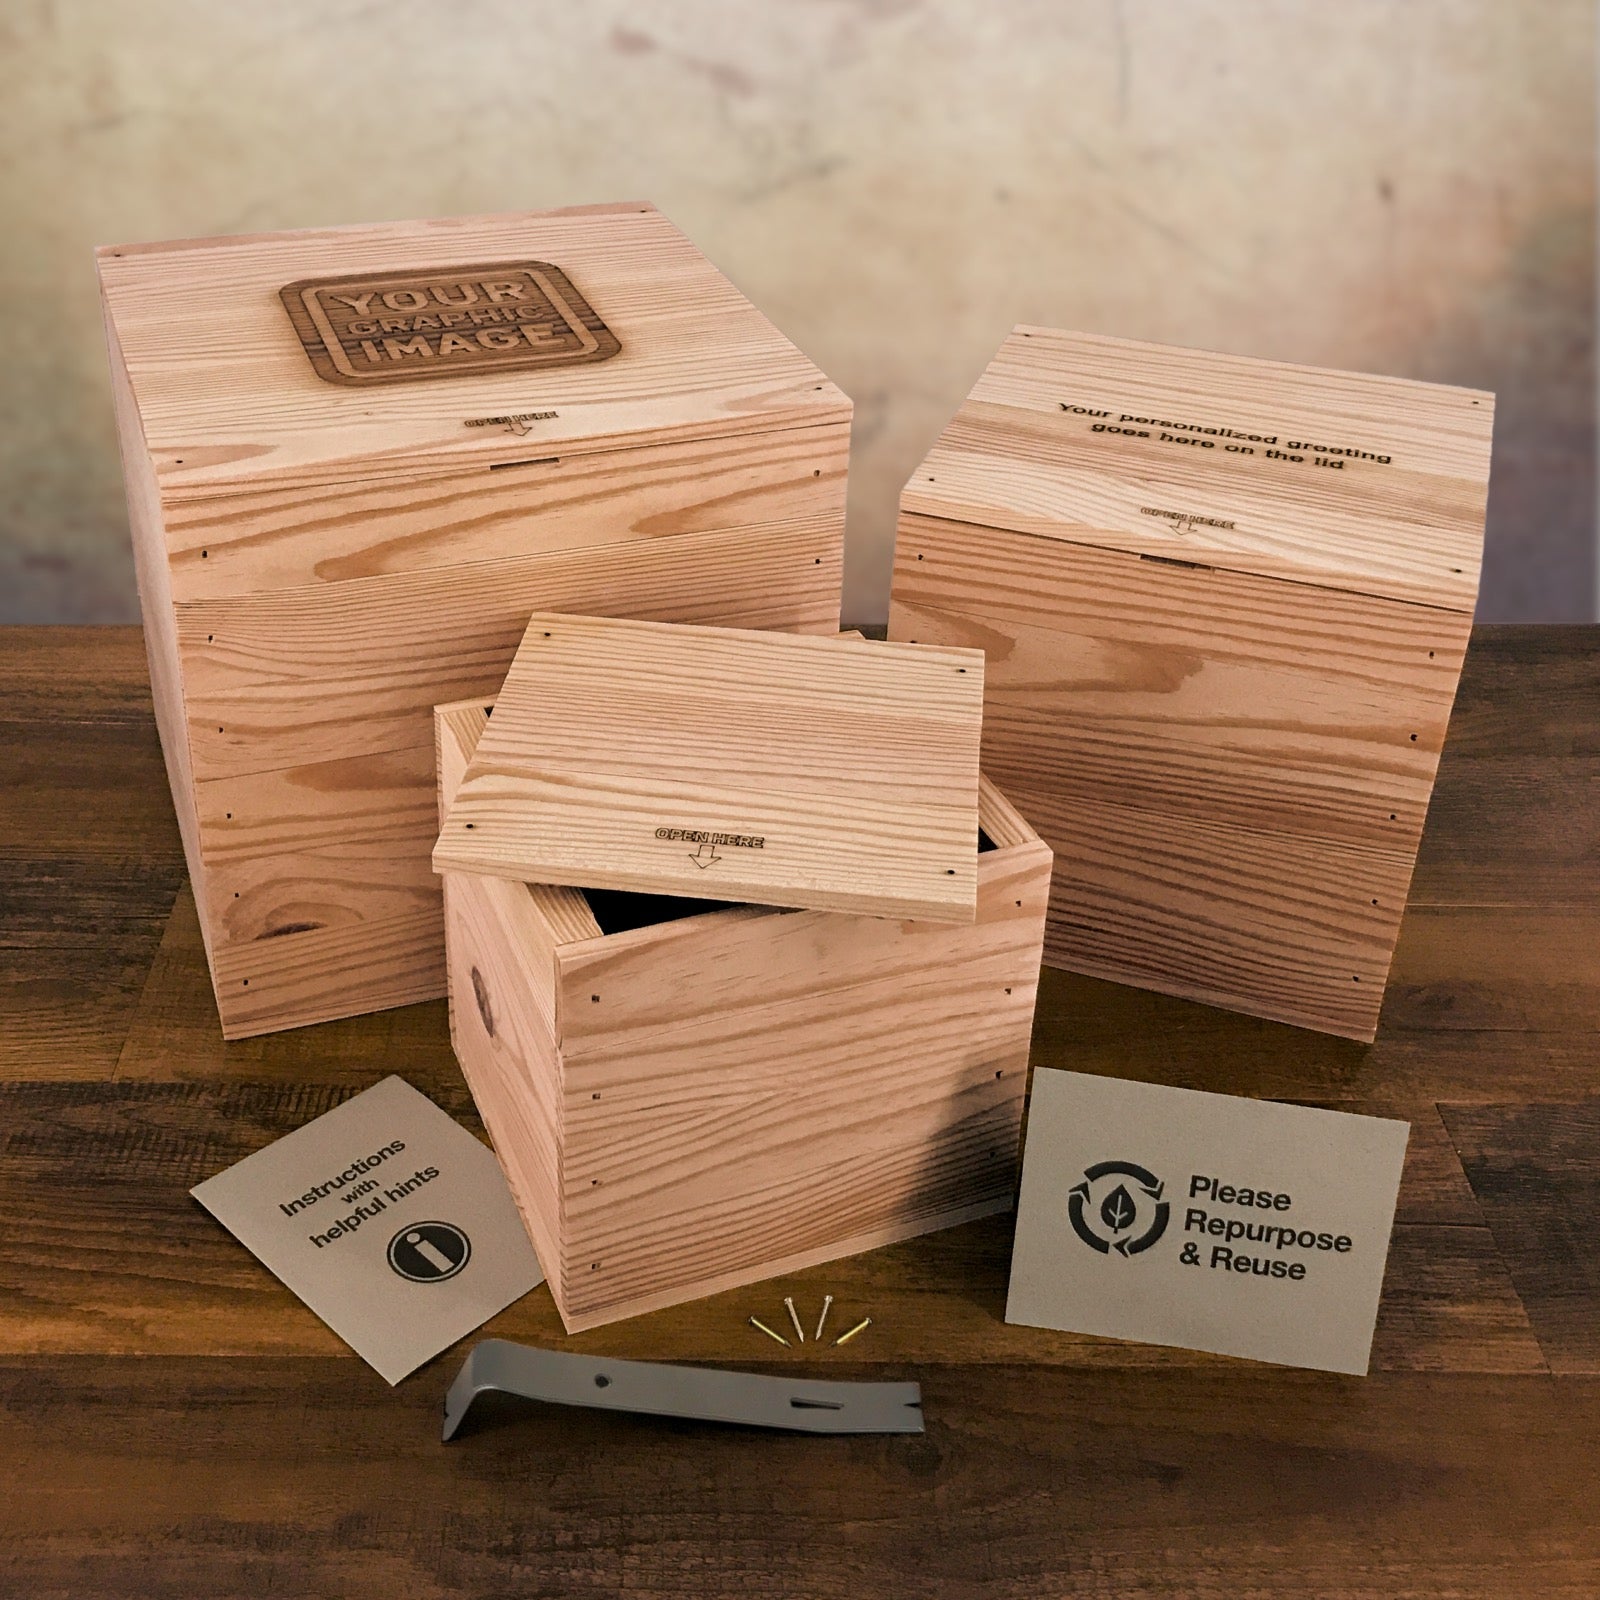 DIY Gift Crate Kits by Carpente Core